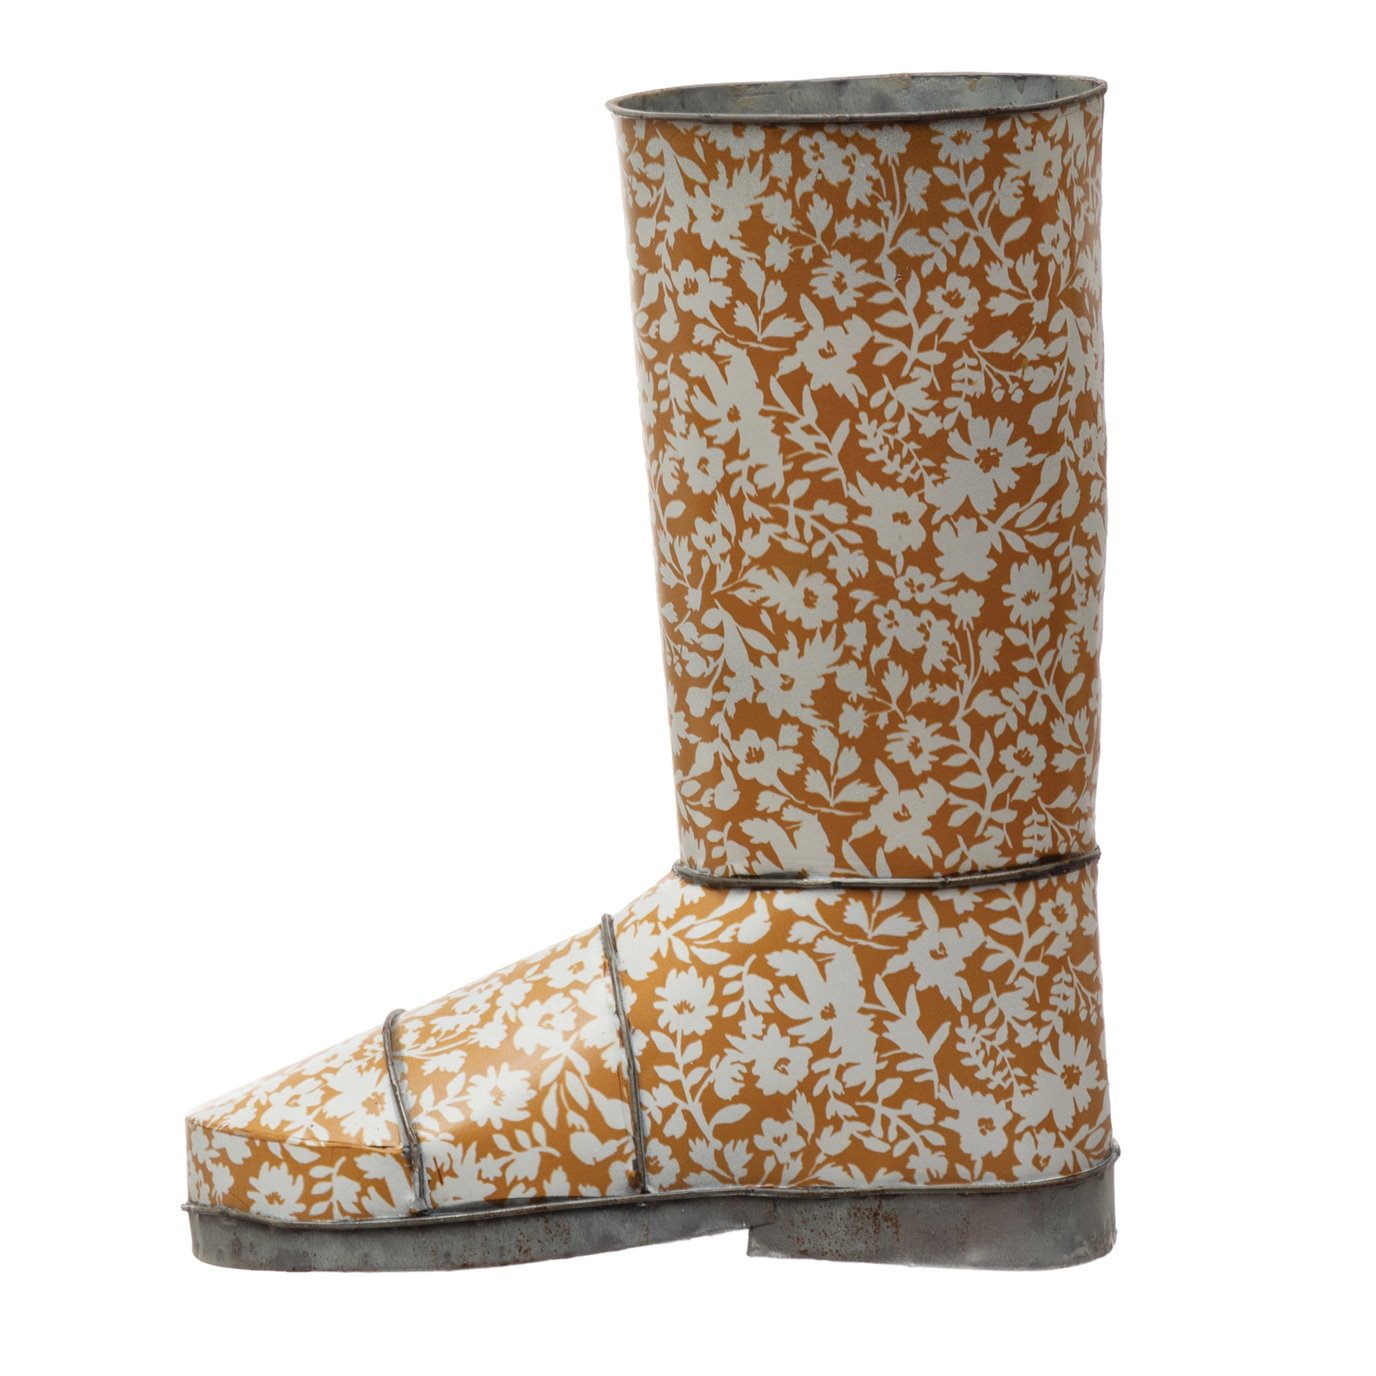 Decorative Metal Garden Boot with Floral Pattern, Mustard Color & White ©